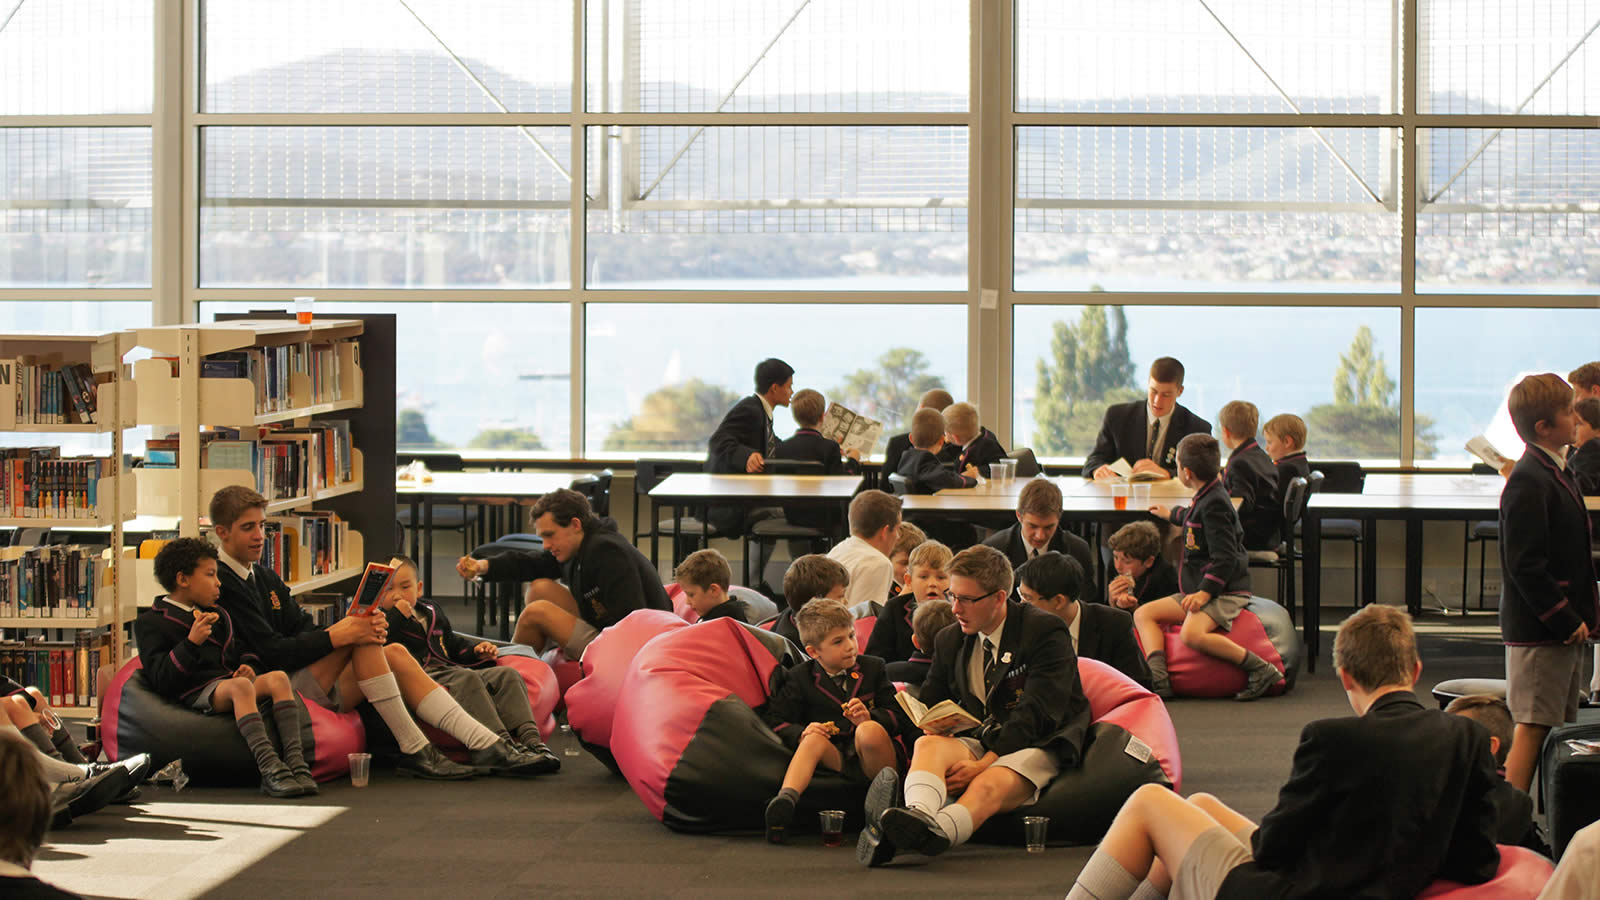 Year 2 and Year 12 students sharing time in the Nettlefold Library. (large)